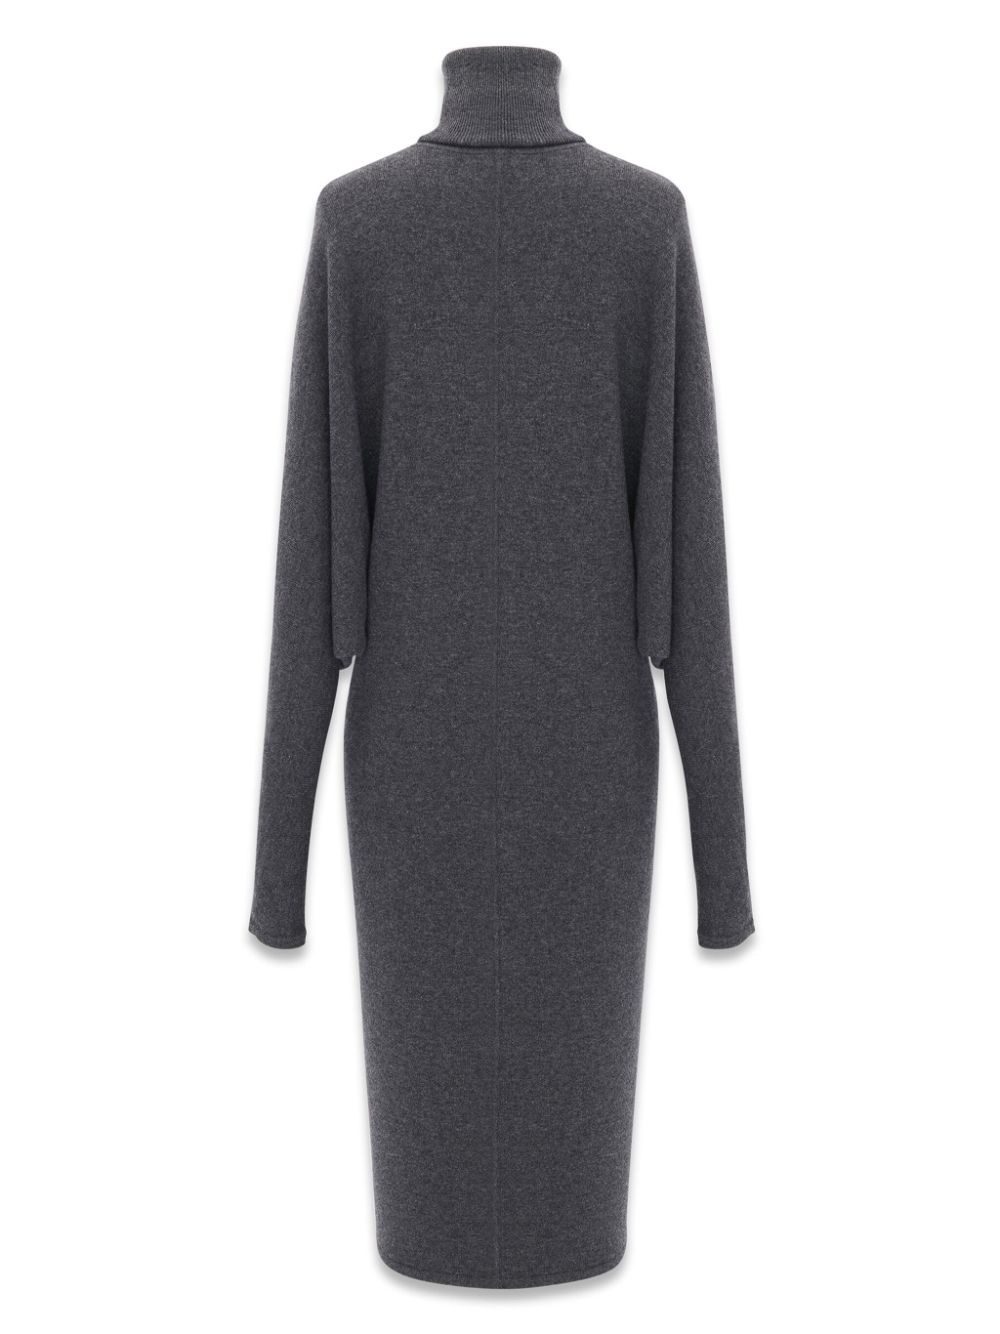 Image 2 of Saint Laurent batwing-sleevees knitted dress